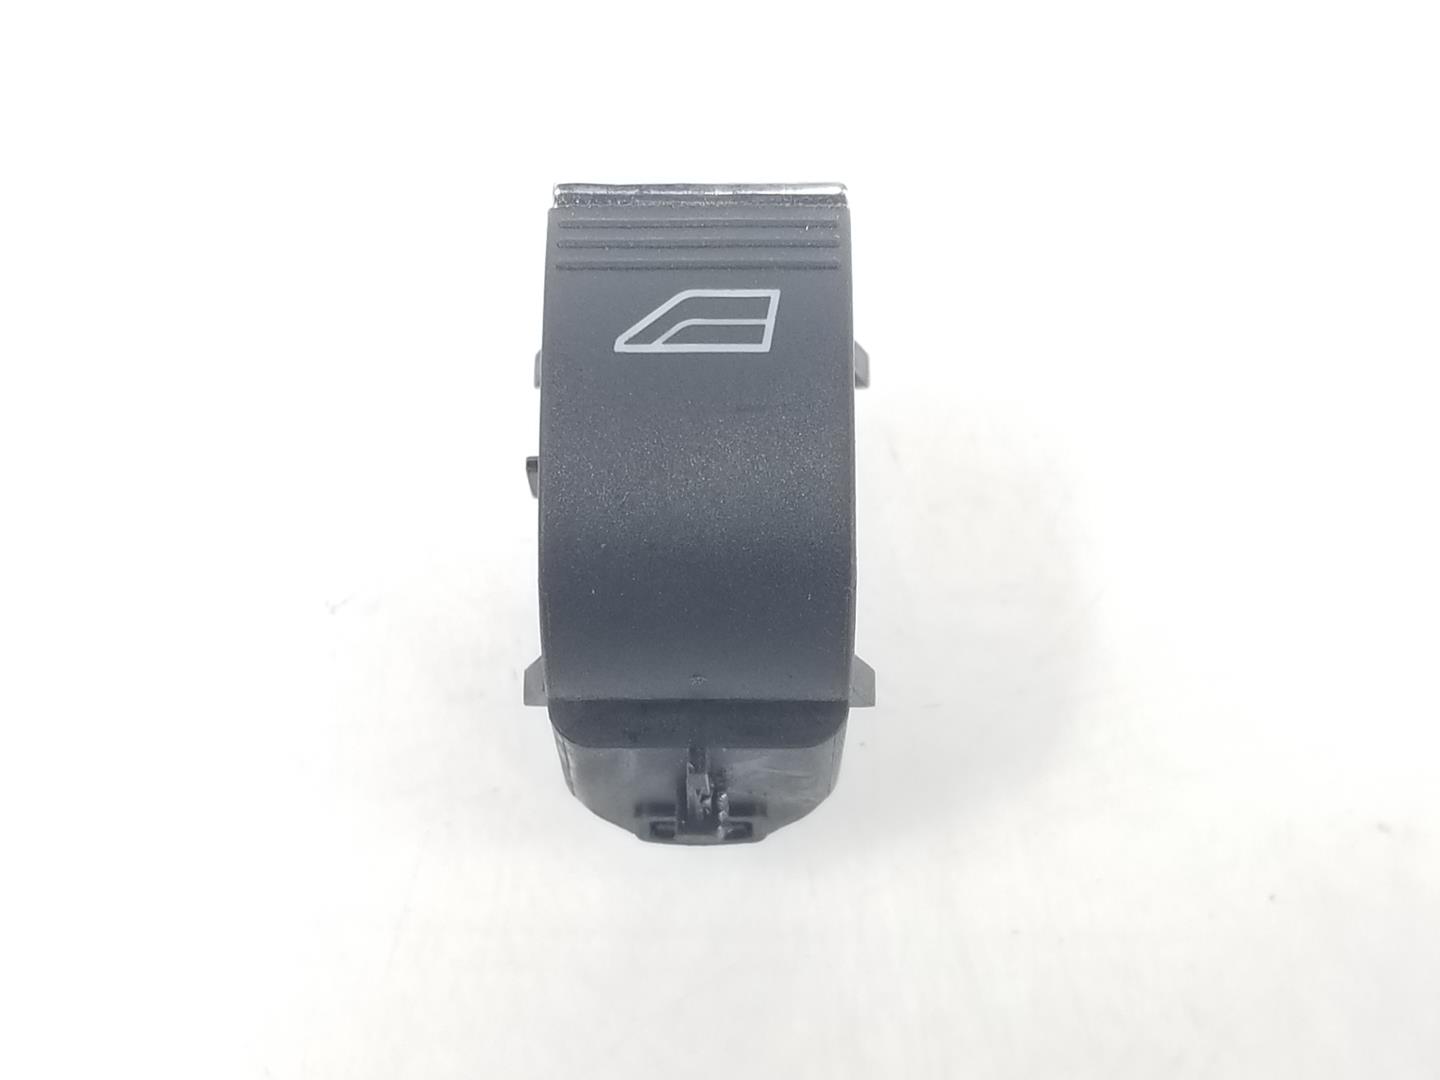 FORD C-Max 2 generation (2010-2019) Rear Right Door Window Control Switch 1850432, F1ET14529AA, 2222DL 19787583